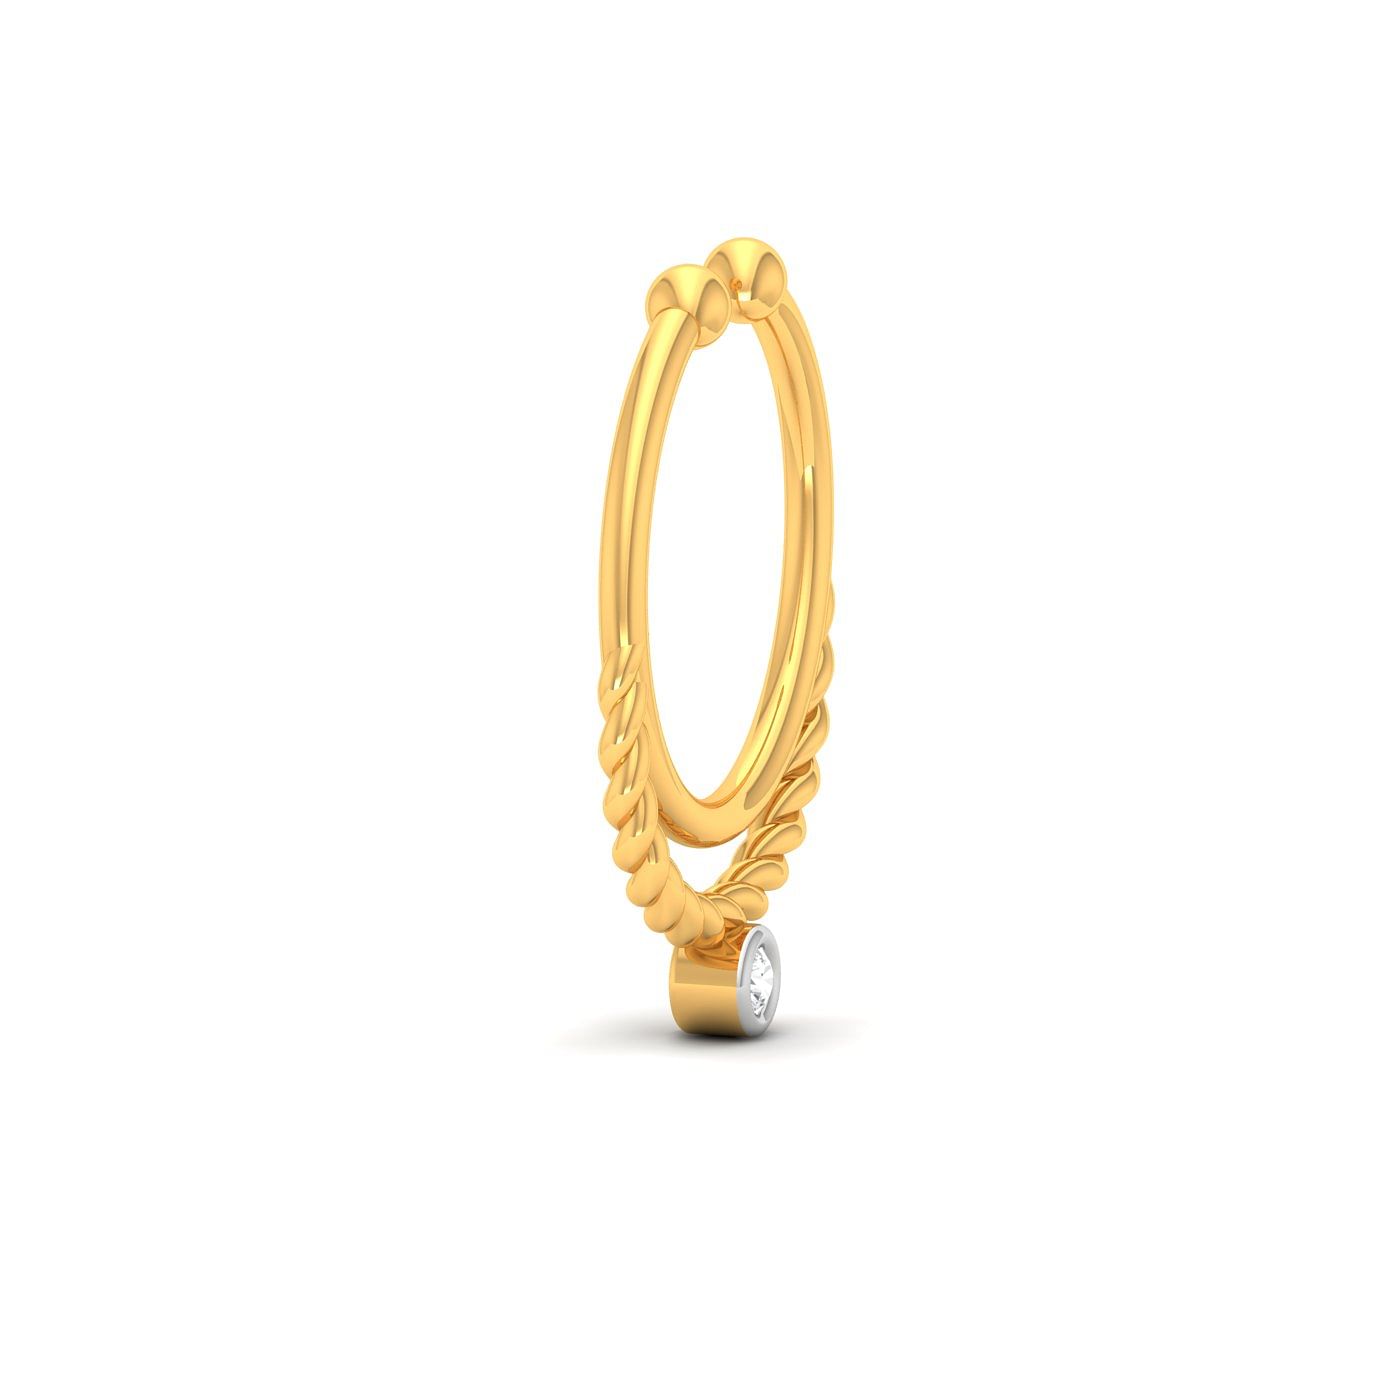 Horseshoe Nonpiercing Nose Ring With Yellow Gold